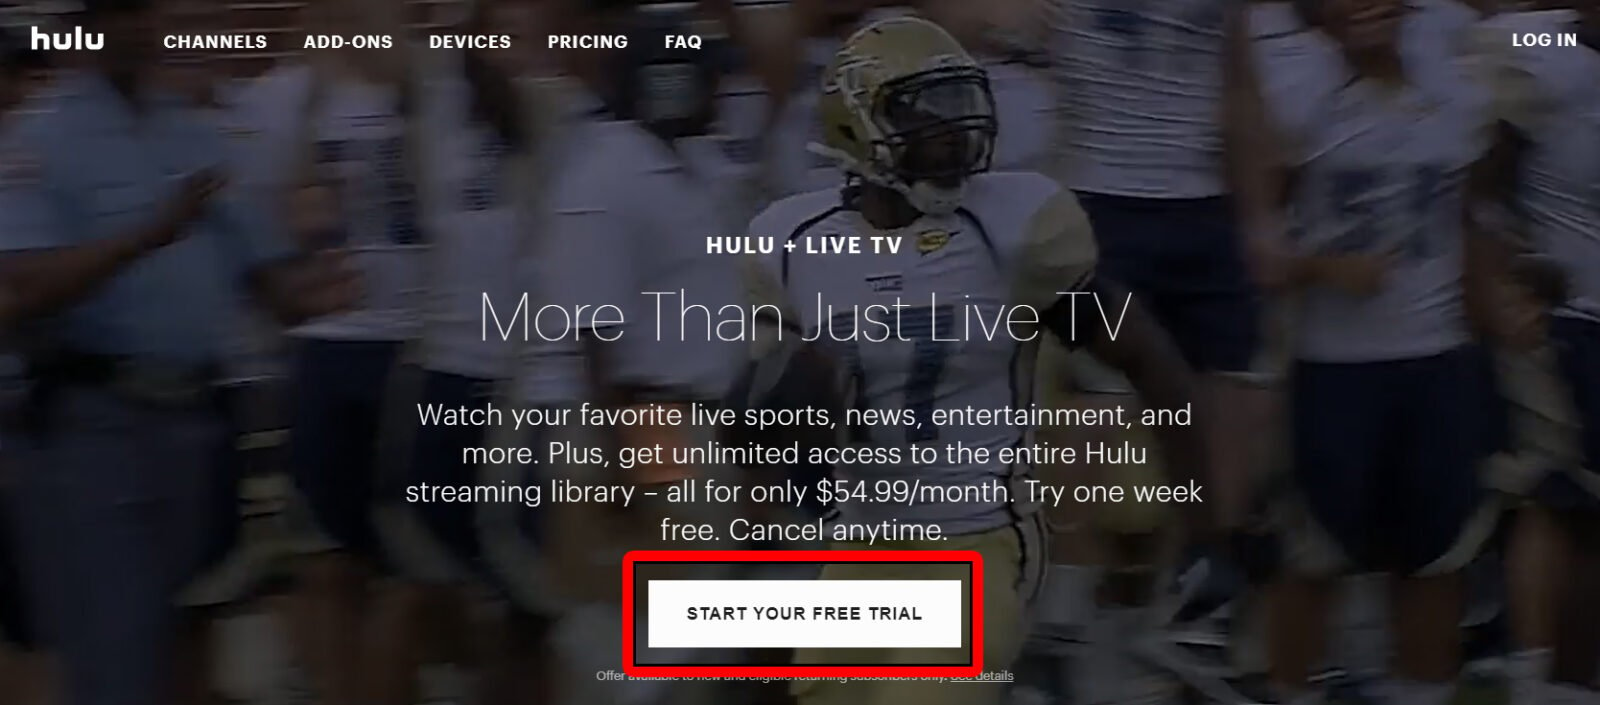 How to Watch Live TV on Hulu HelloTech How